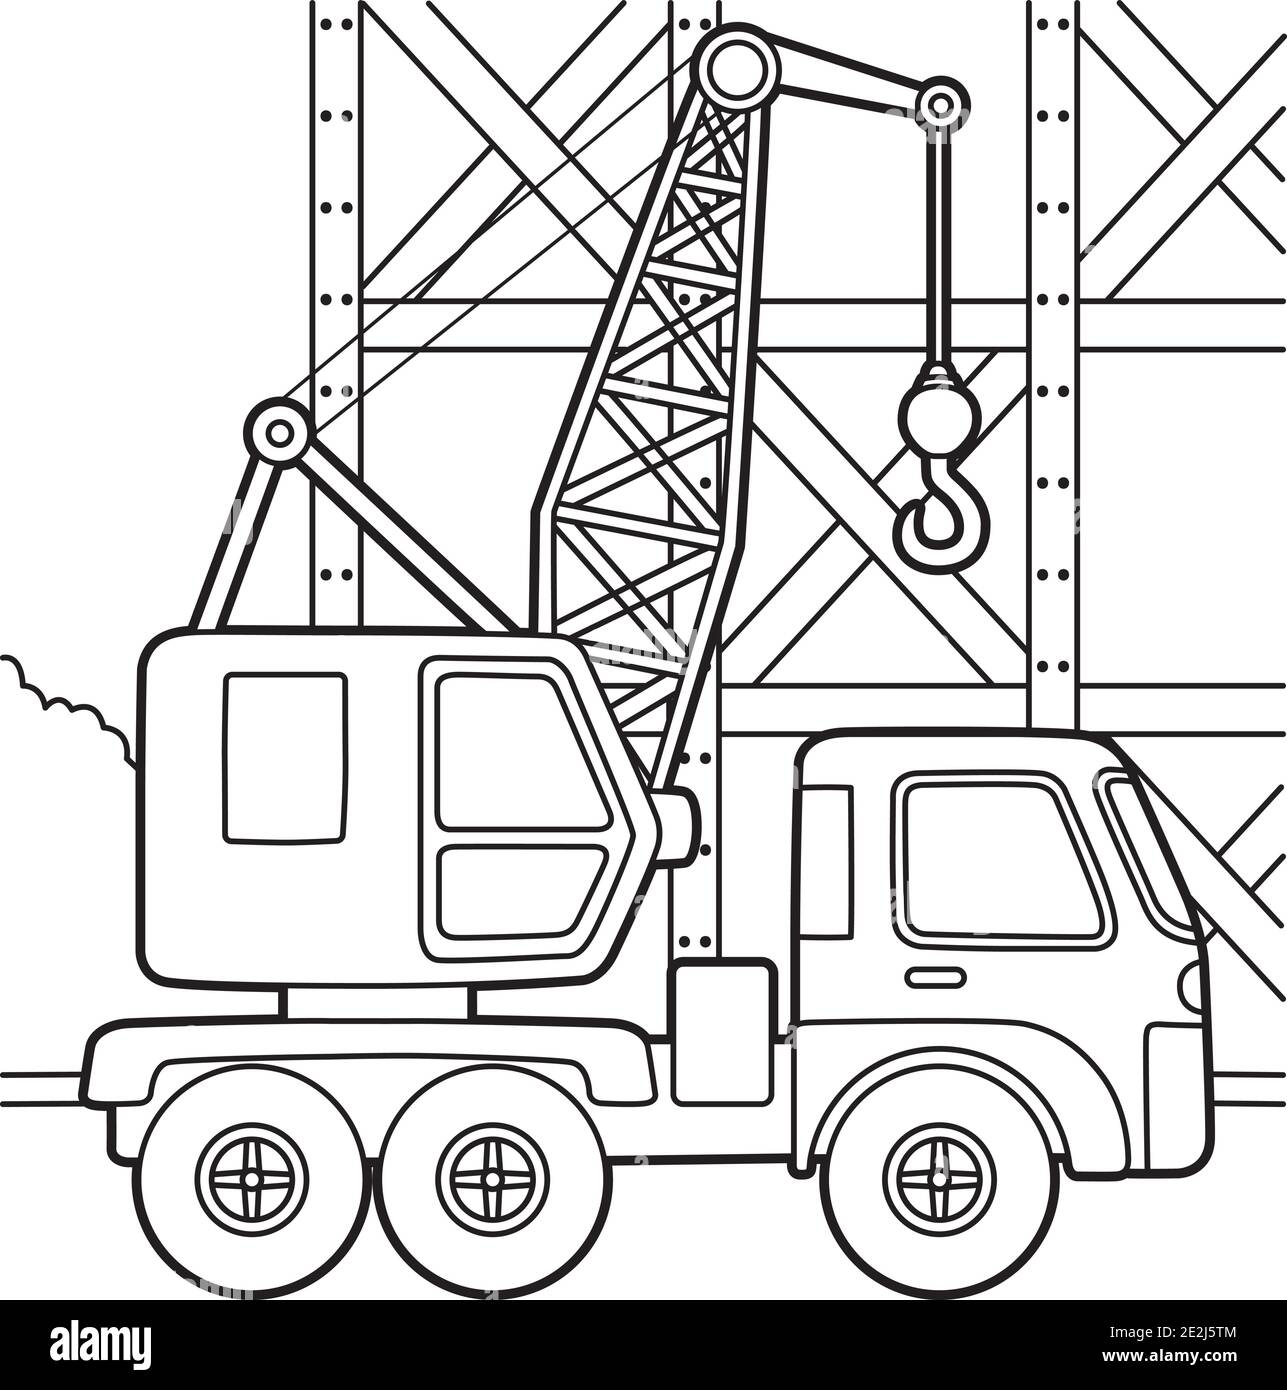 Crane Coloring Page Stock Vector Image & Art - Alamy